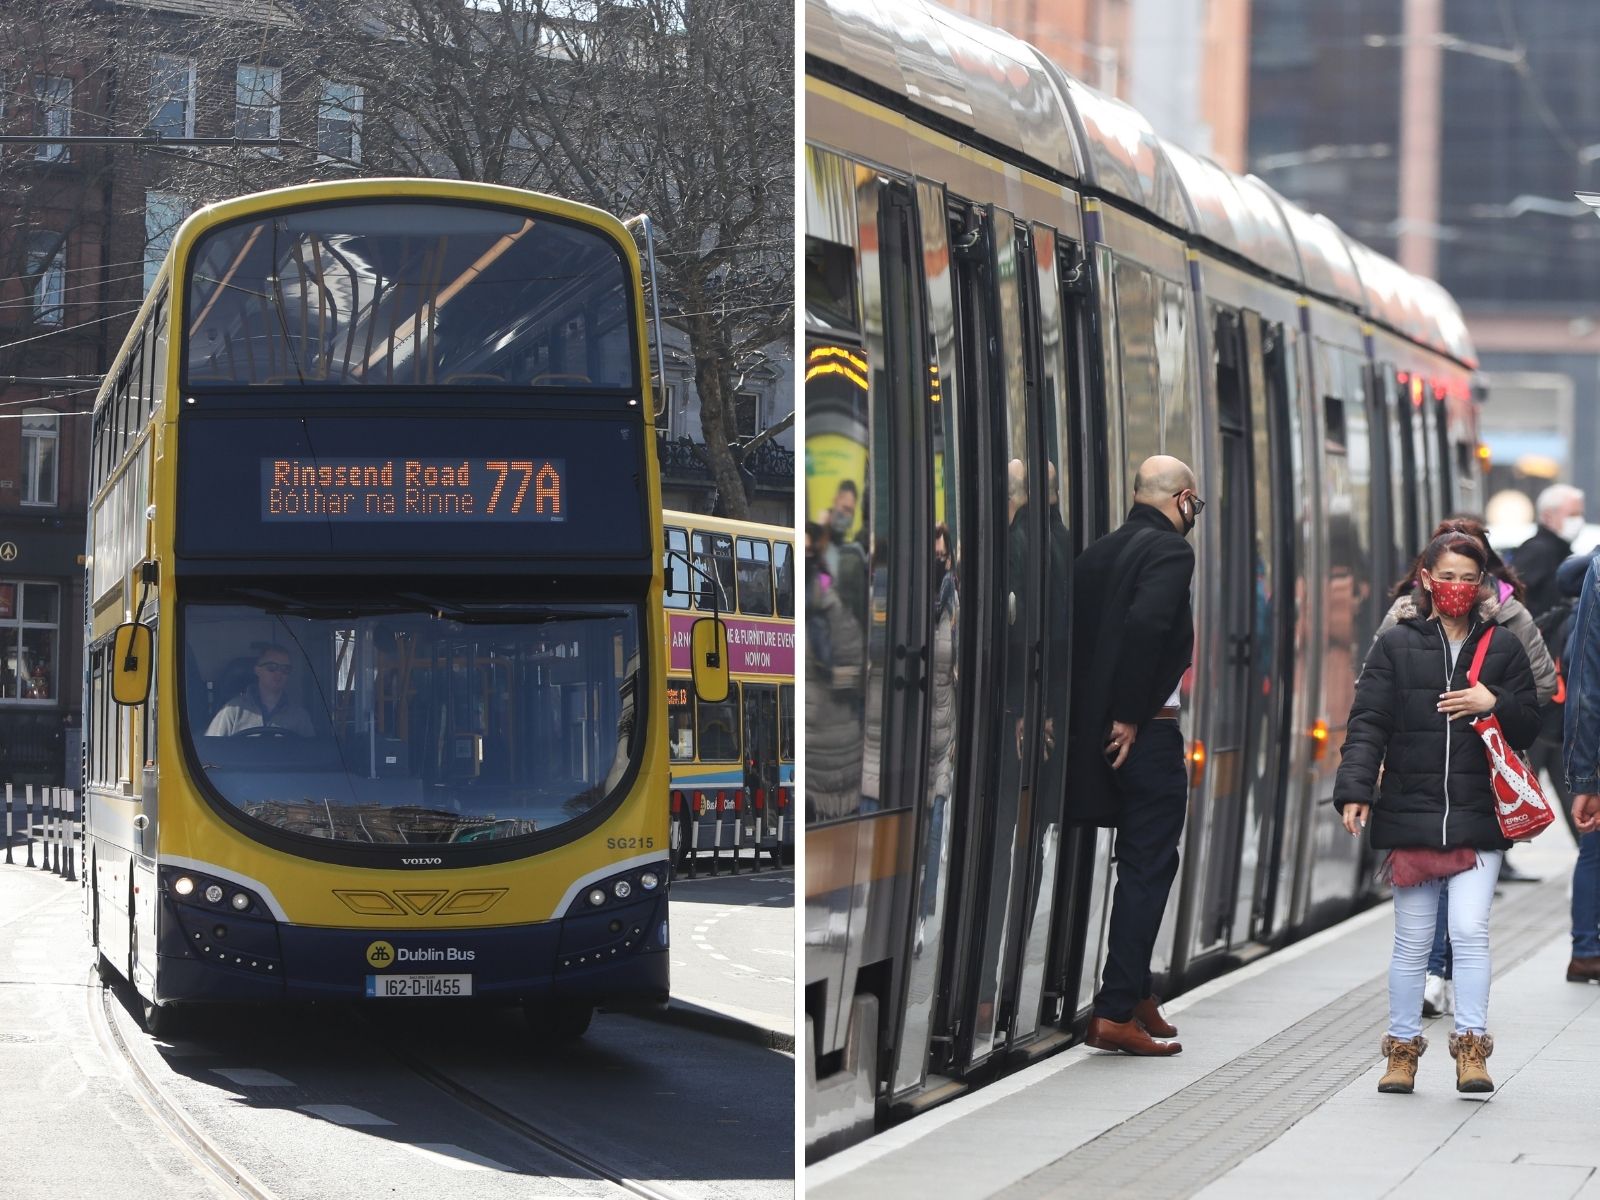 Composite image shows a Dublin Bus on College Green in Dublin city, and commuters on the Luas in Dublin